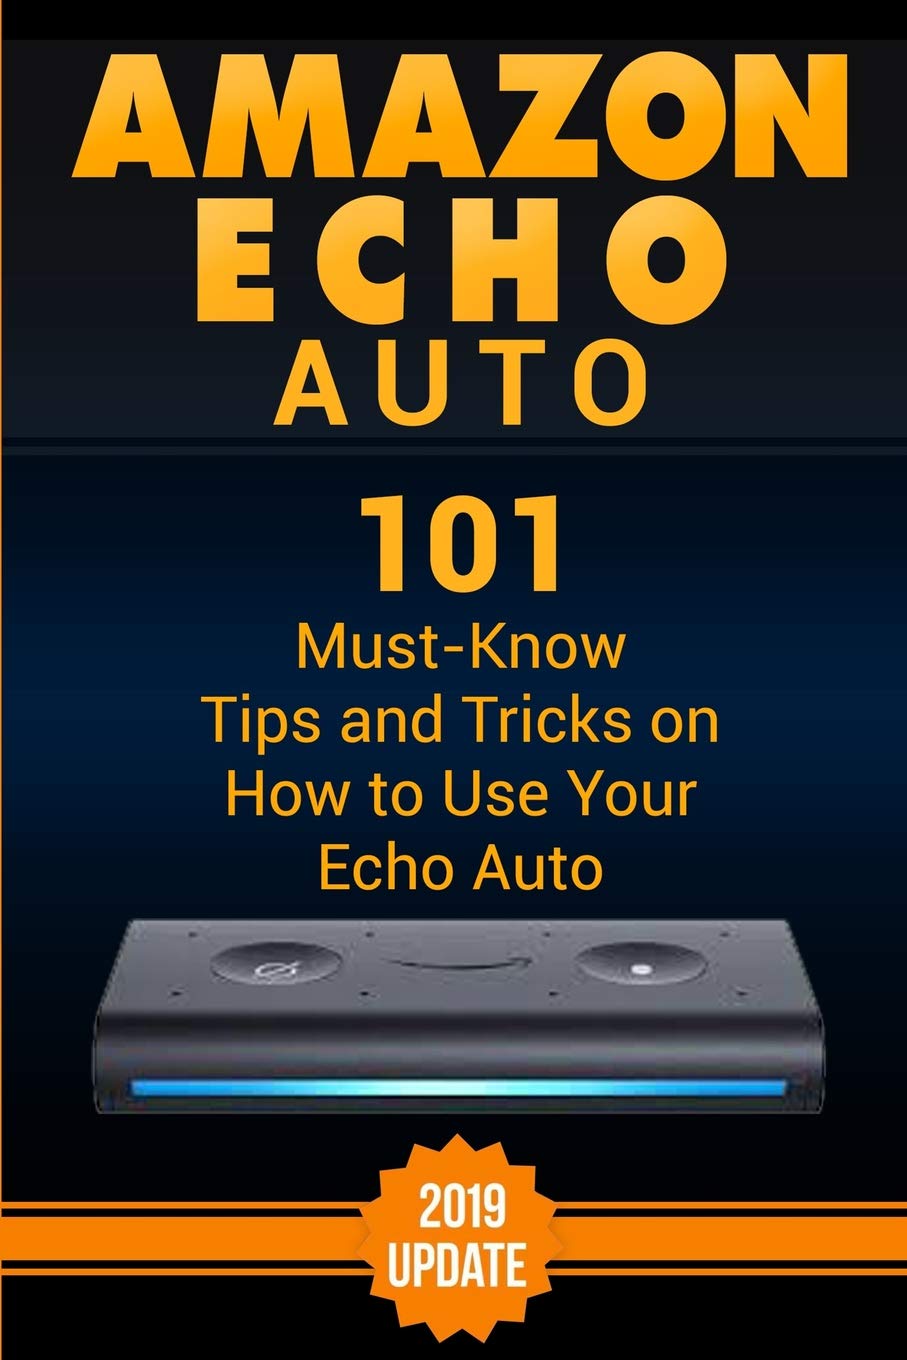 Book Cover Amazon Echo Auto: 101 Must-Know Tips and Tricks on How to Use Your Echo Auto.